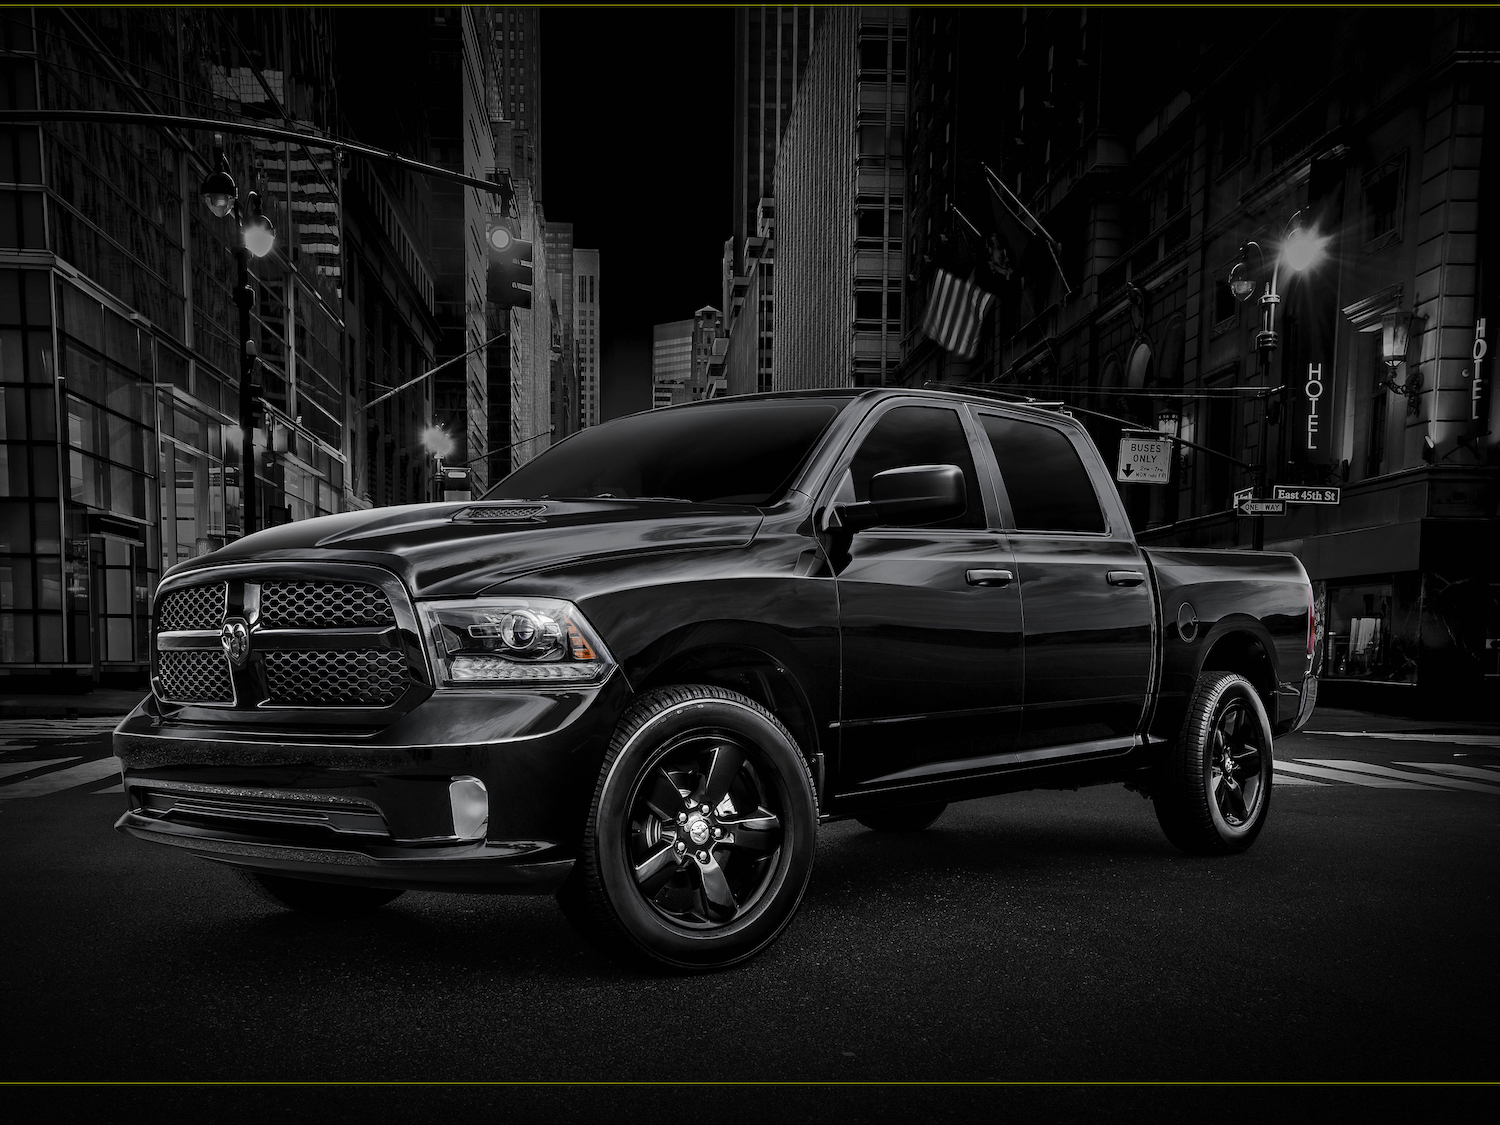 This 2013 Ram 1500 makes one of the most reliable used pickup trucks from its model year.